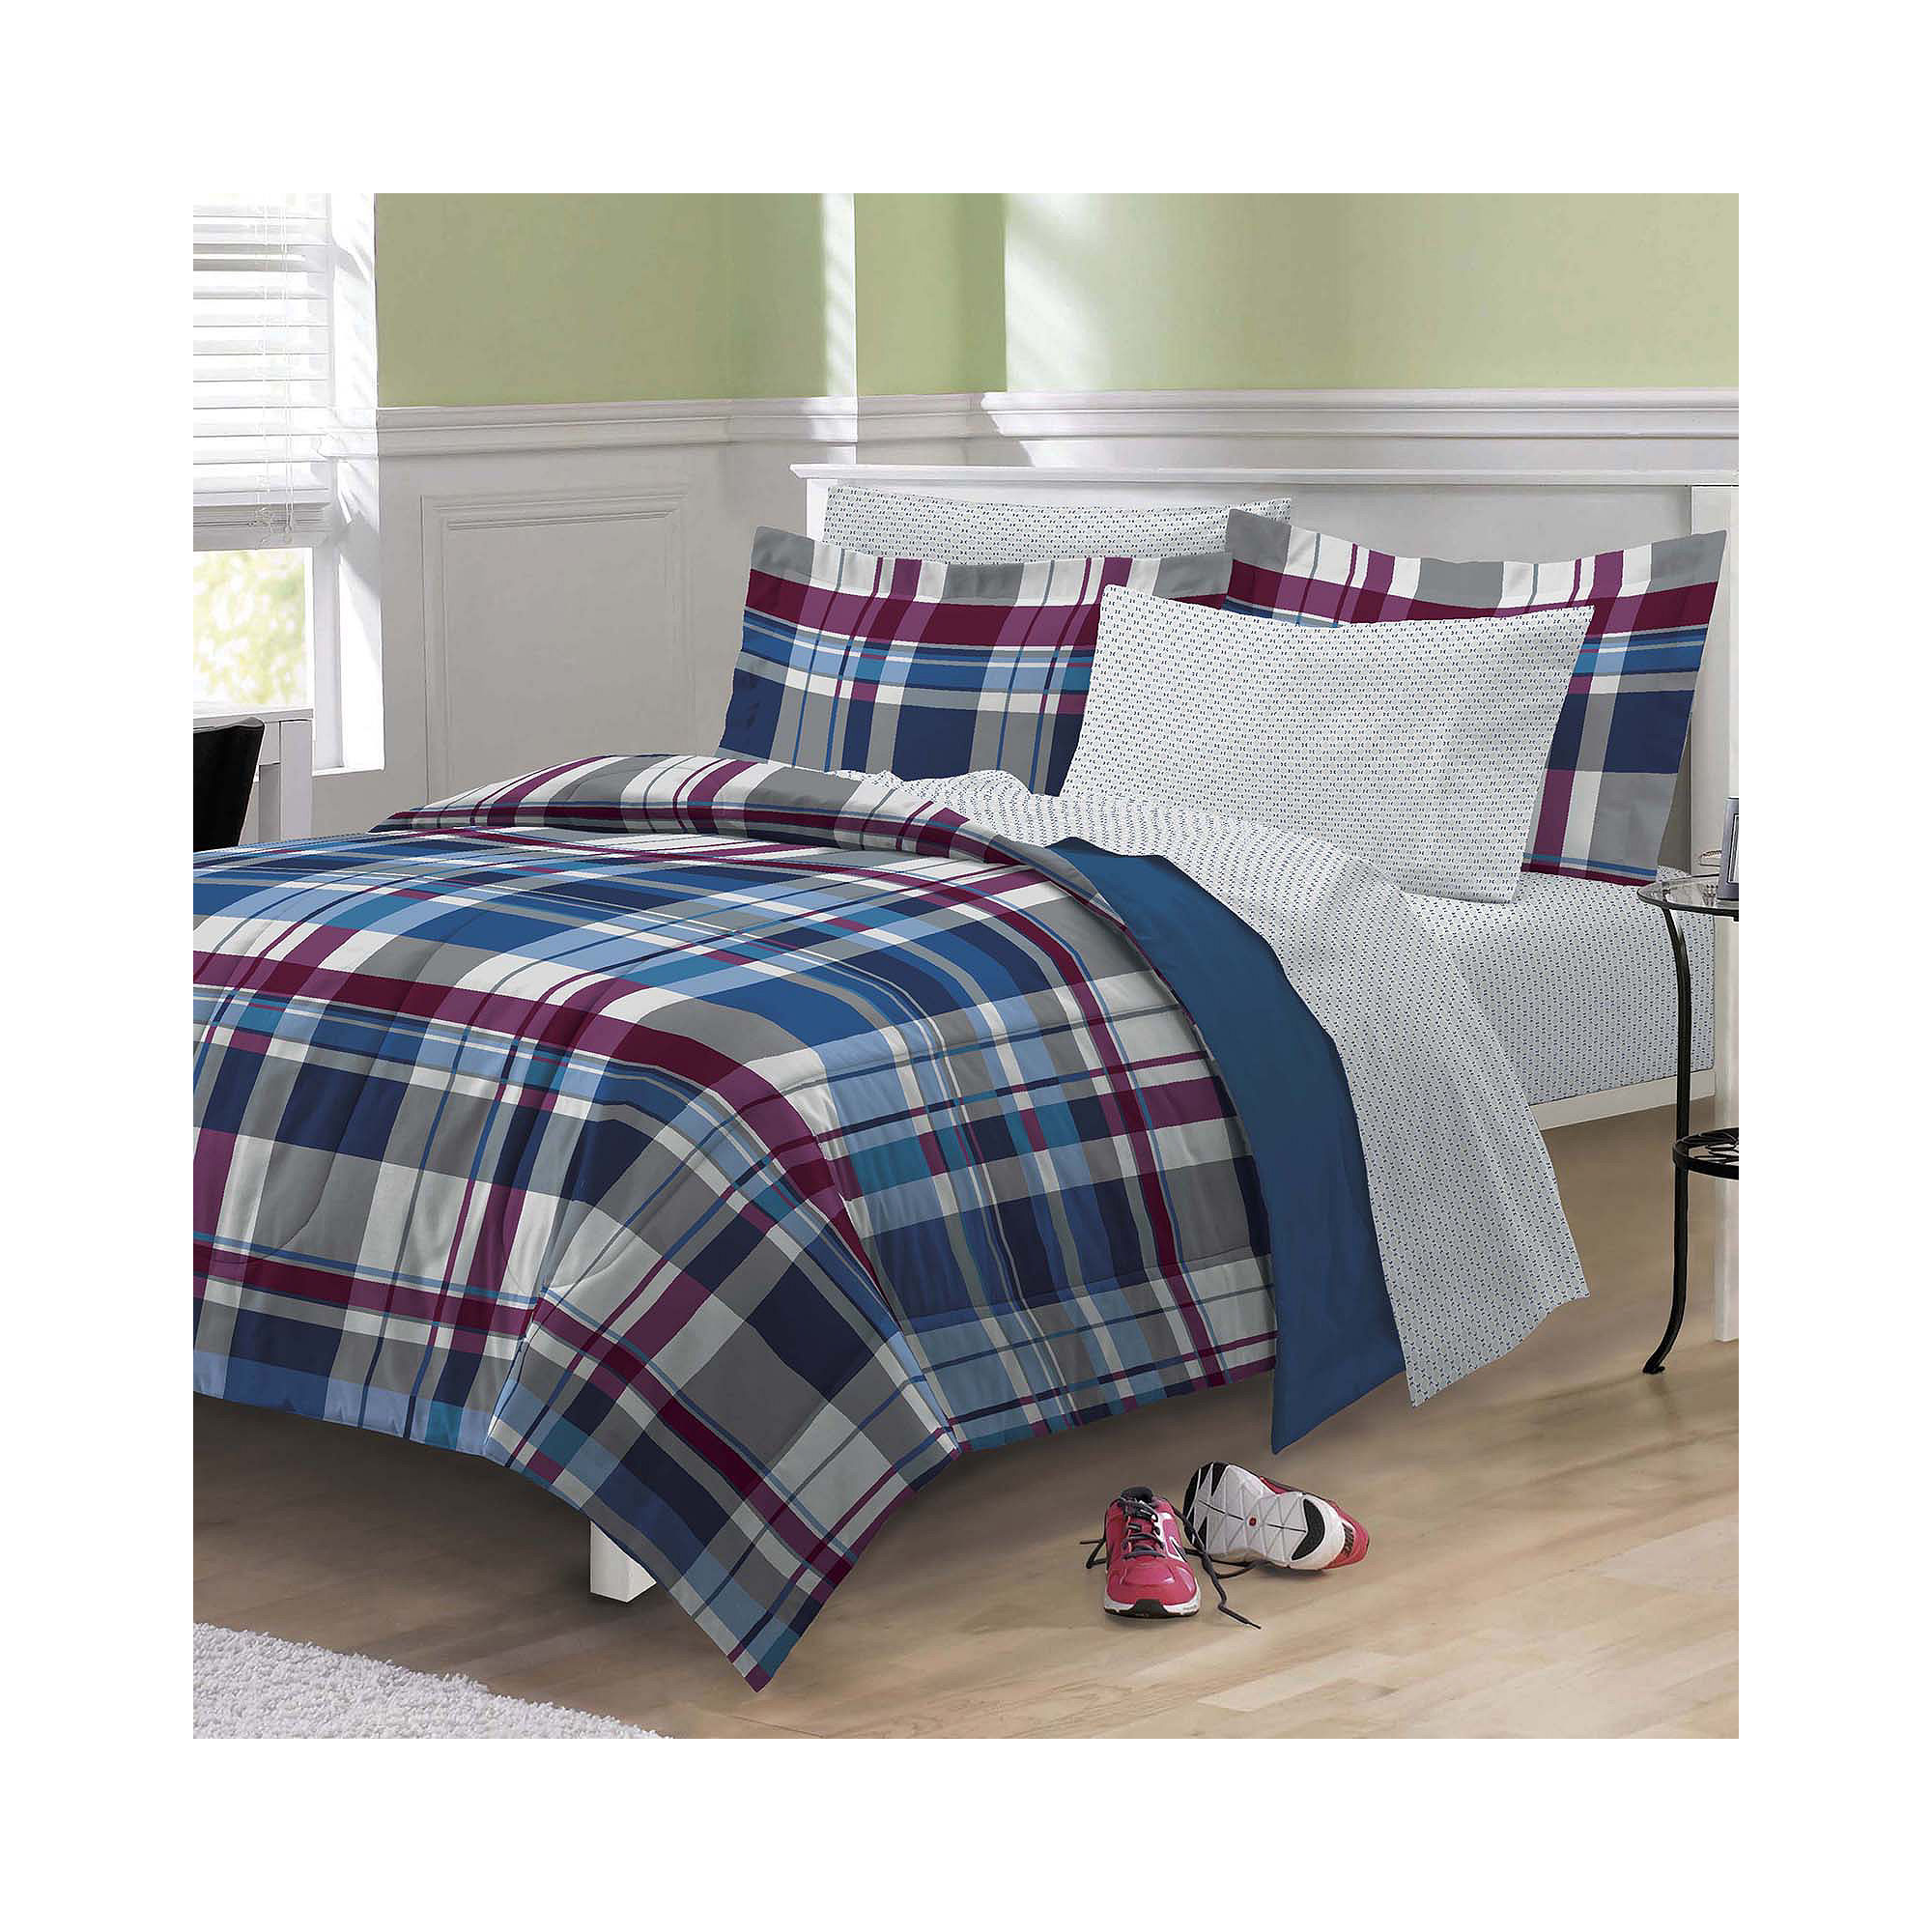 My Room Varsity Plaid Complete Bedding Set with Sheets